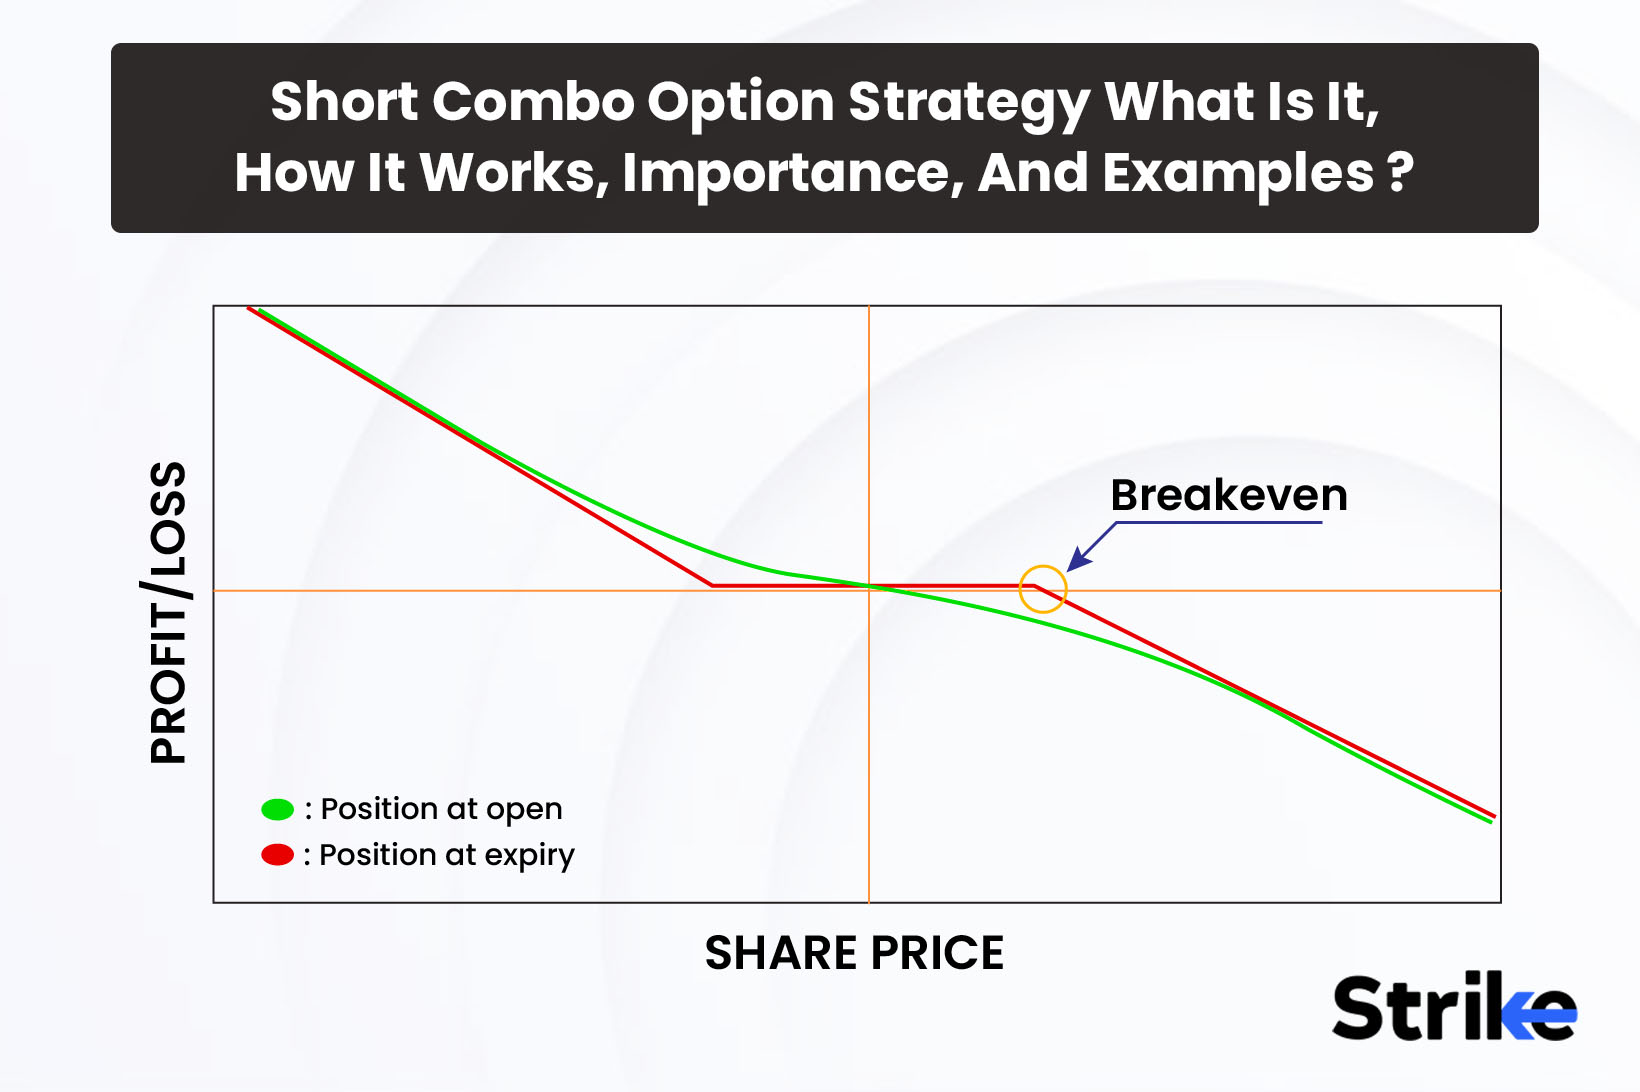 Short Combo Option Strategy: What Is It, How It Works, Importance, And Examples